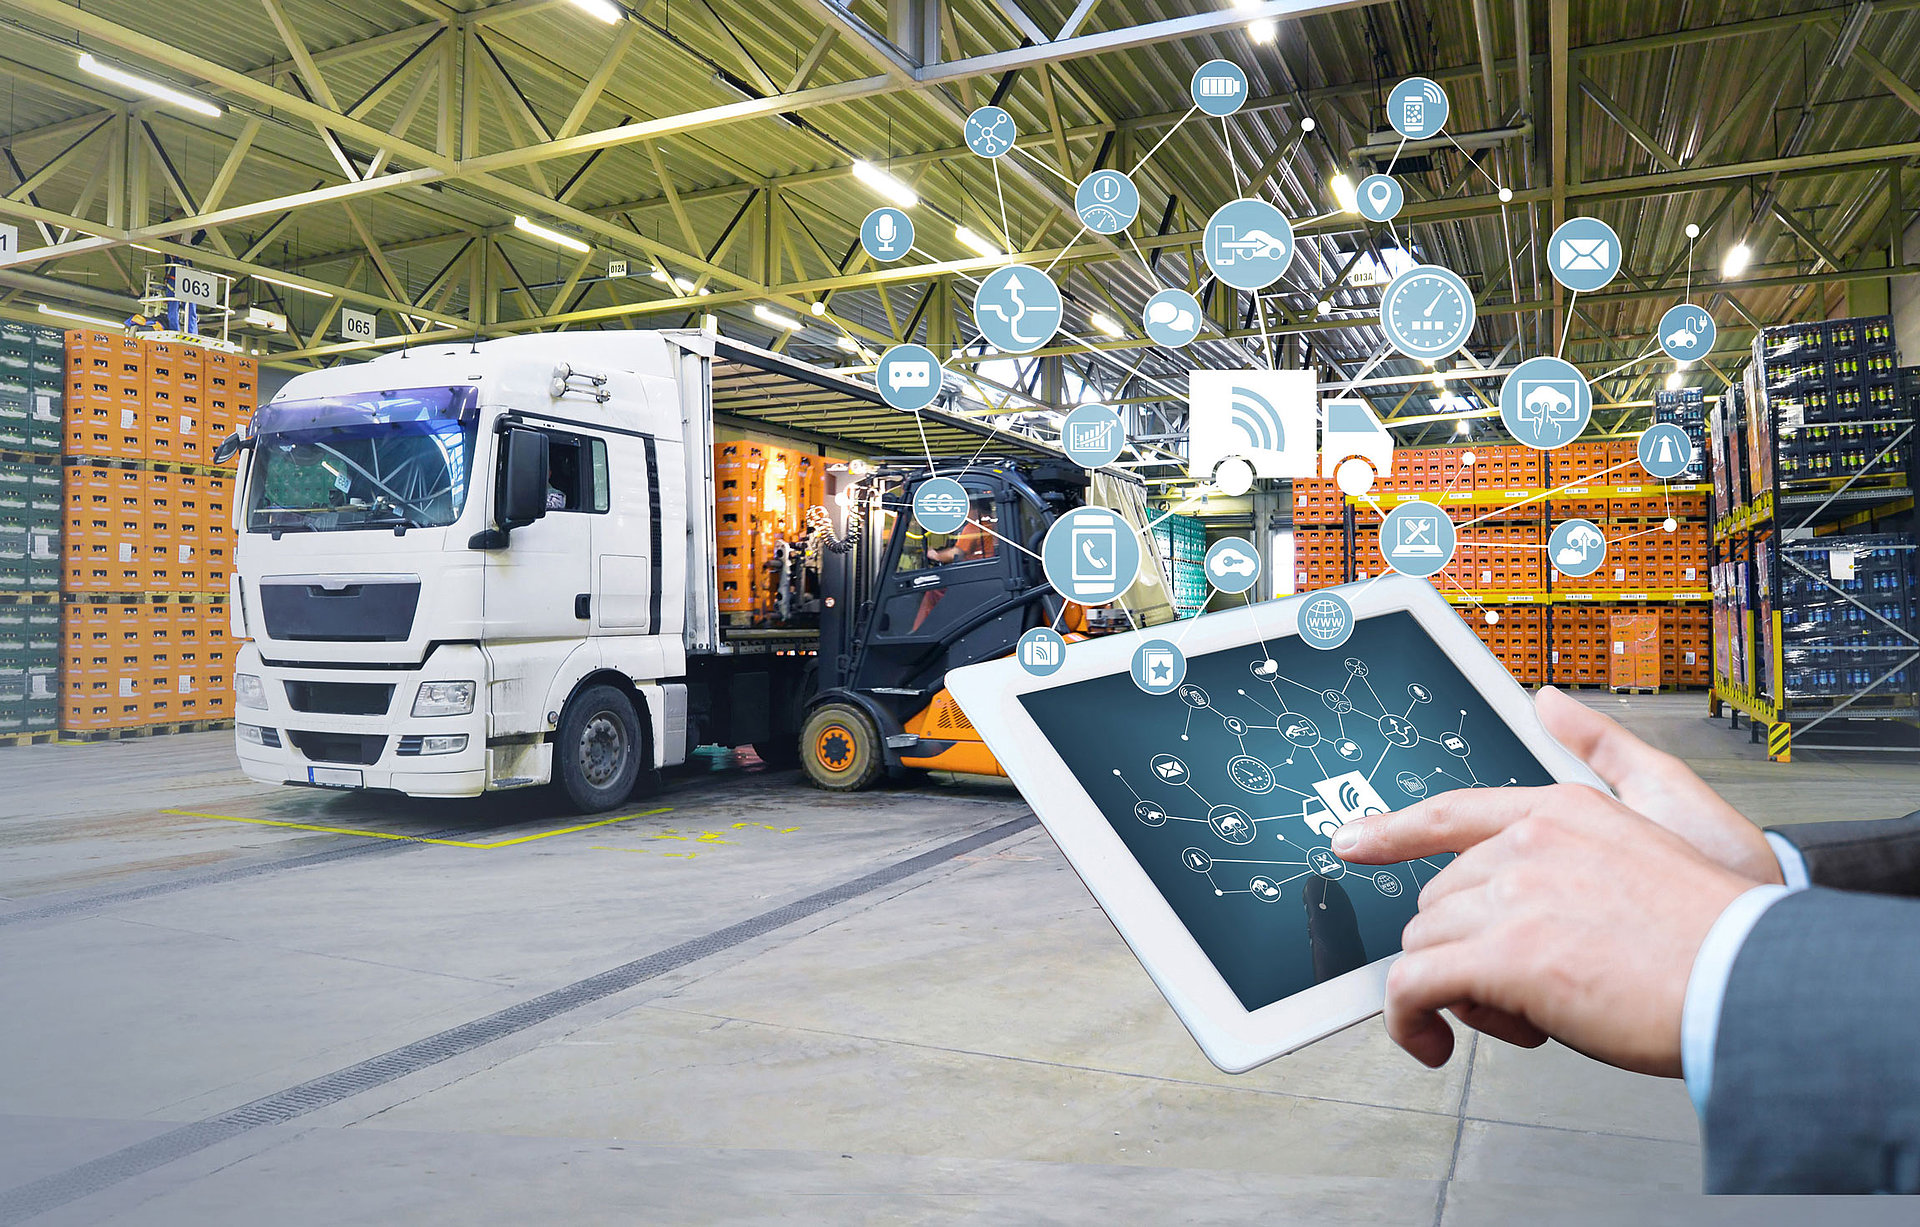 A finger points to a tablet with connected symbols and in the background, a truck is loaded with boxes